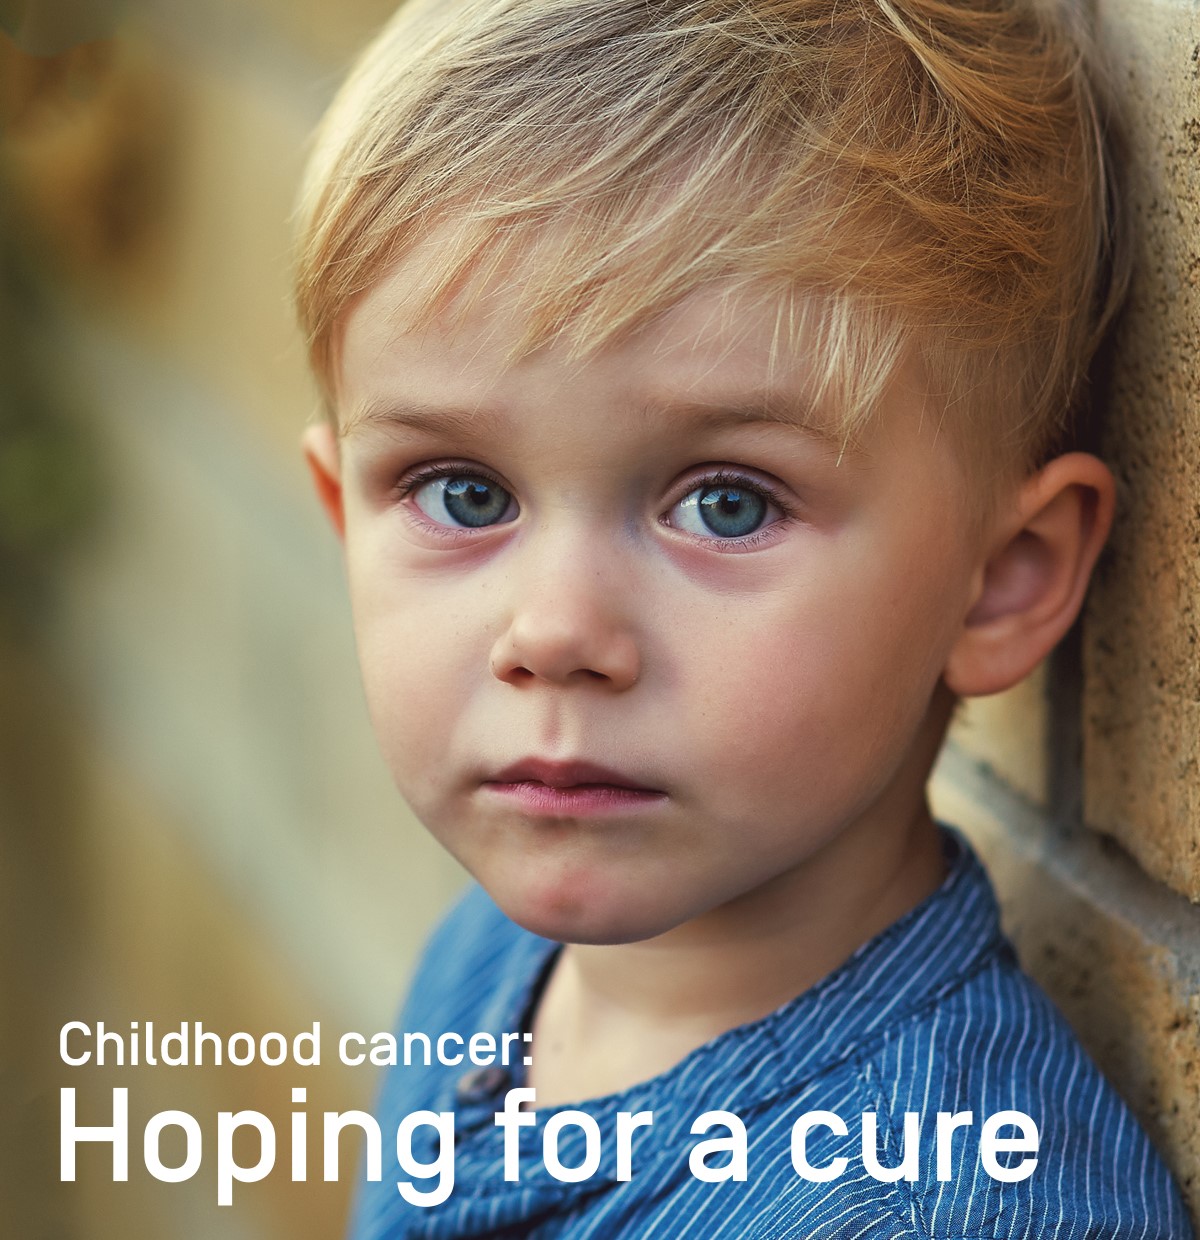 Childhood cancer: hoping for a cure